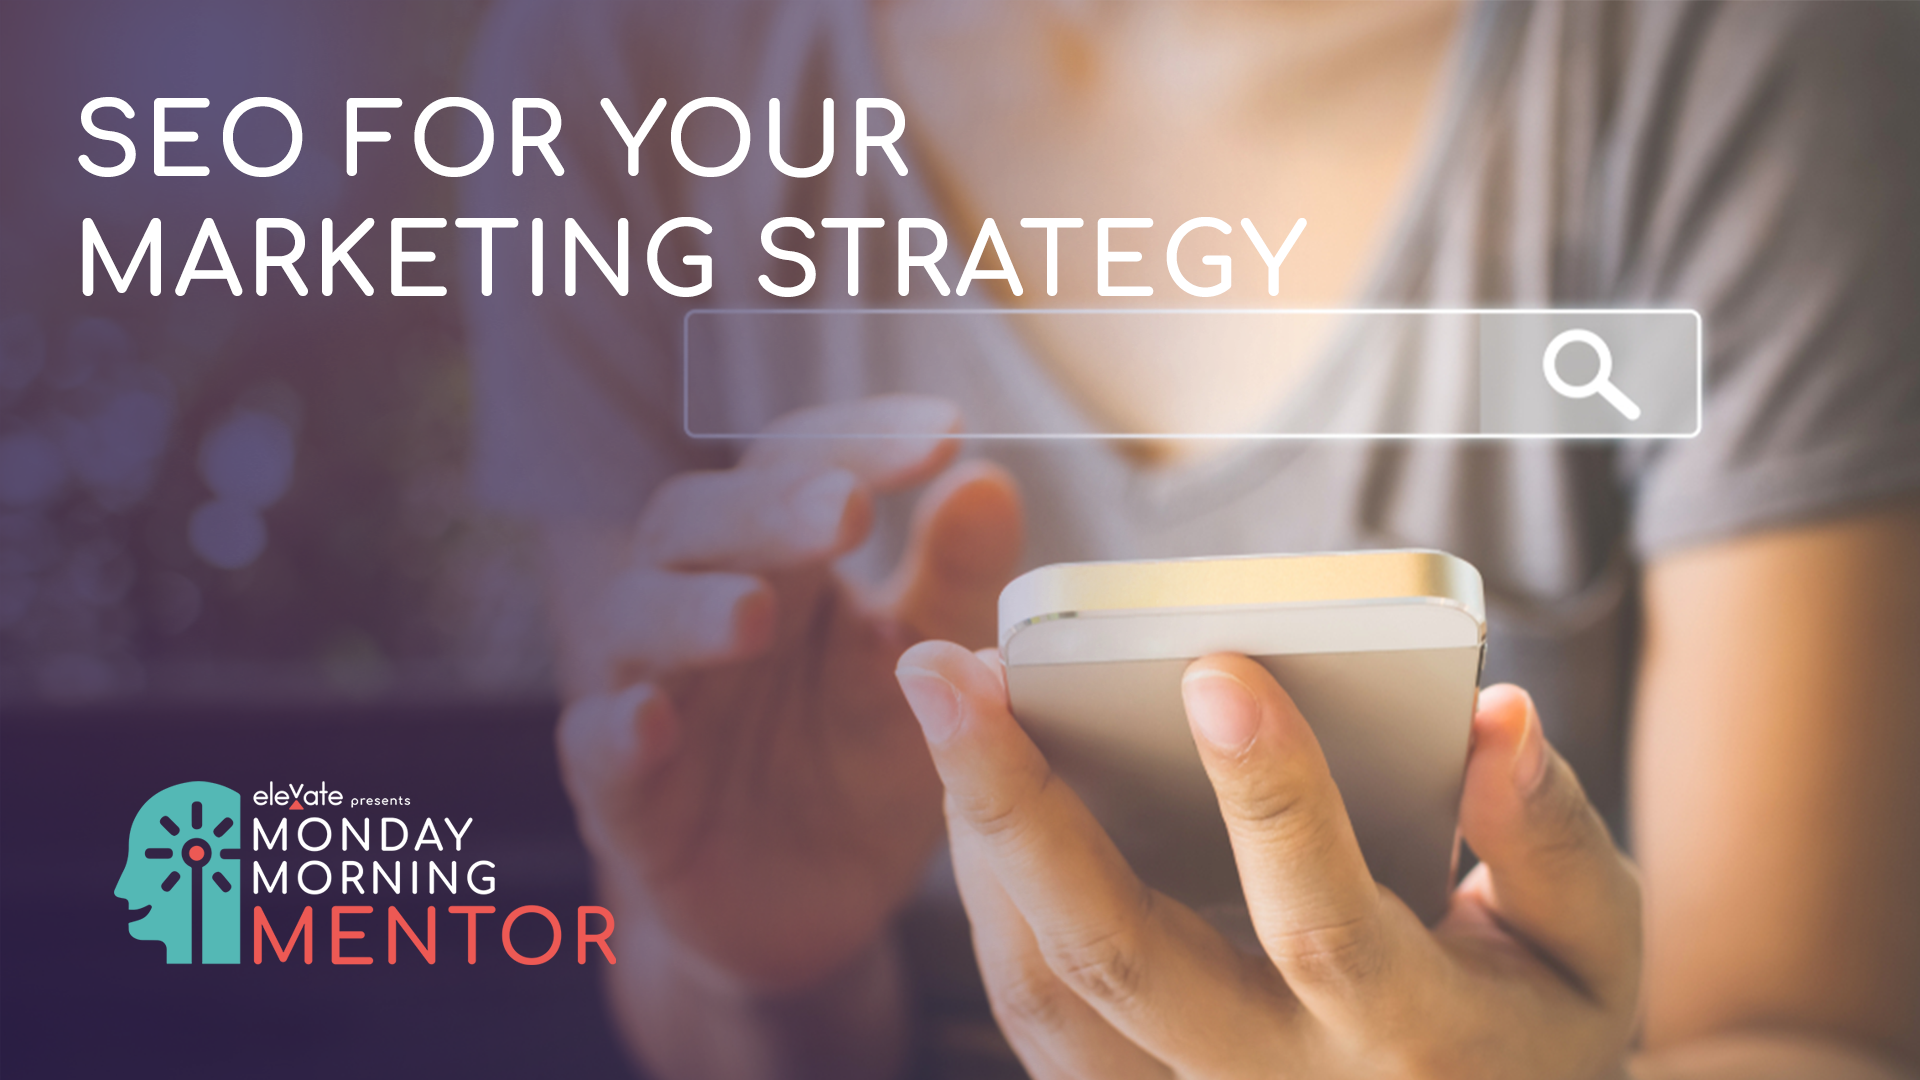 Monday Morning Mentor - SEO for your Marketing Strategy